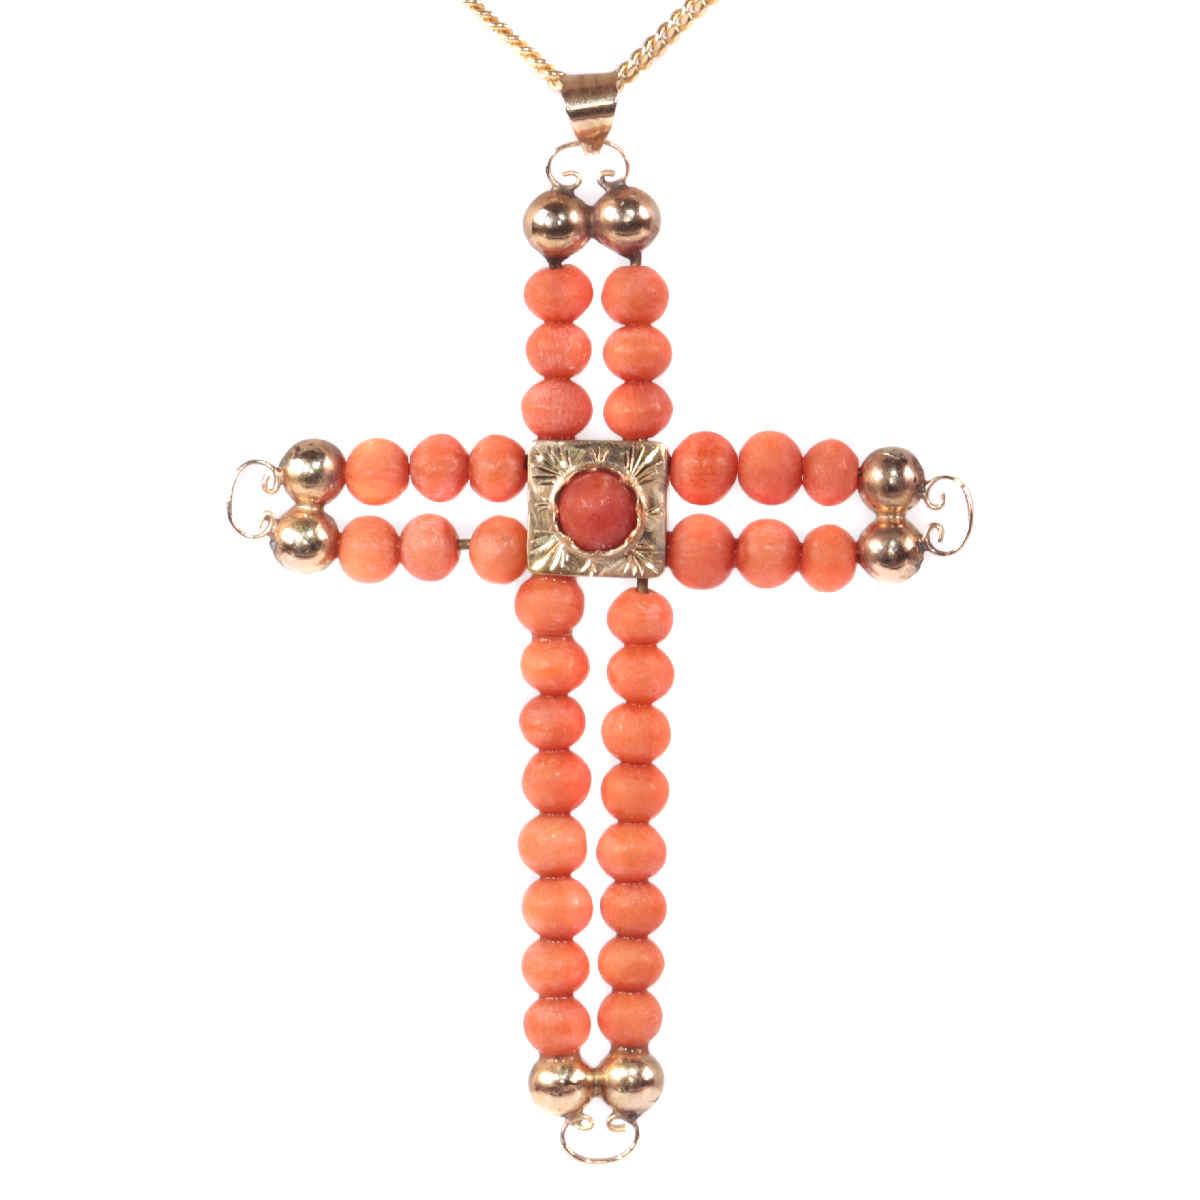 Antique Victorian 18K pink gold cross with blood coral beads